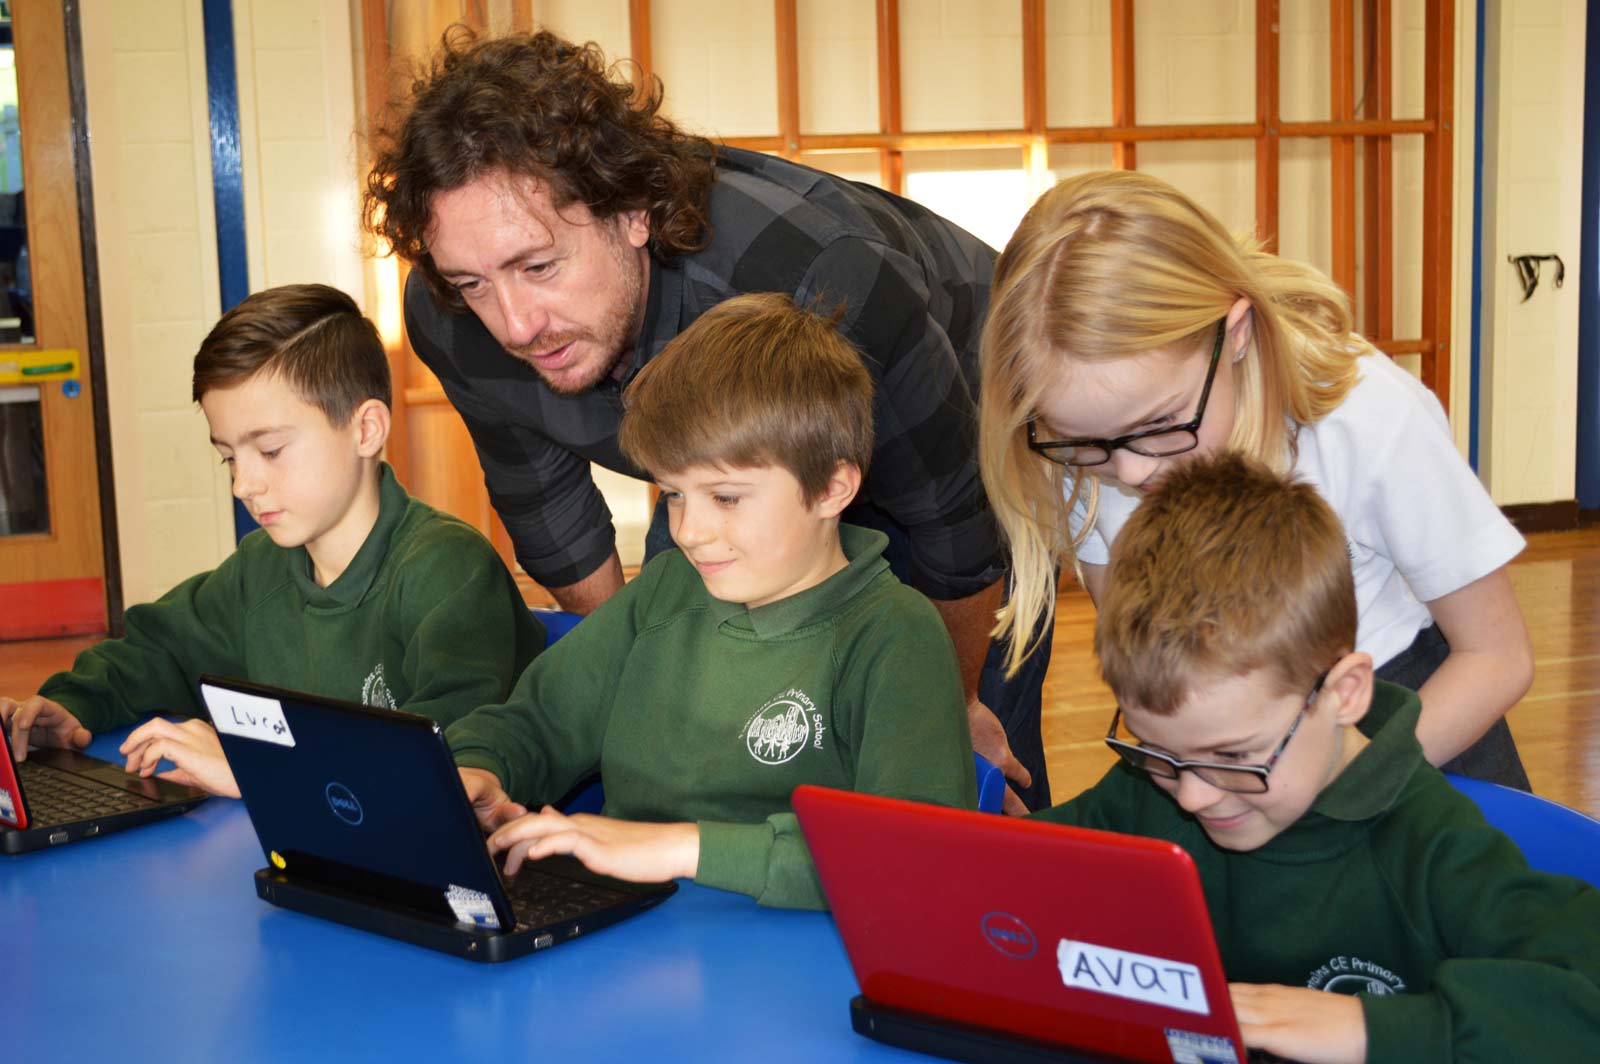 Cricketer Ryan Sidebottom visited pupils at Fountains CE Primary School